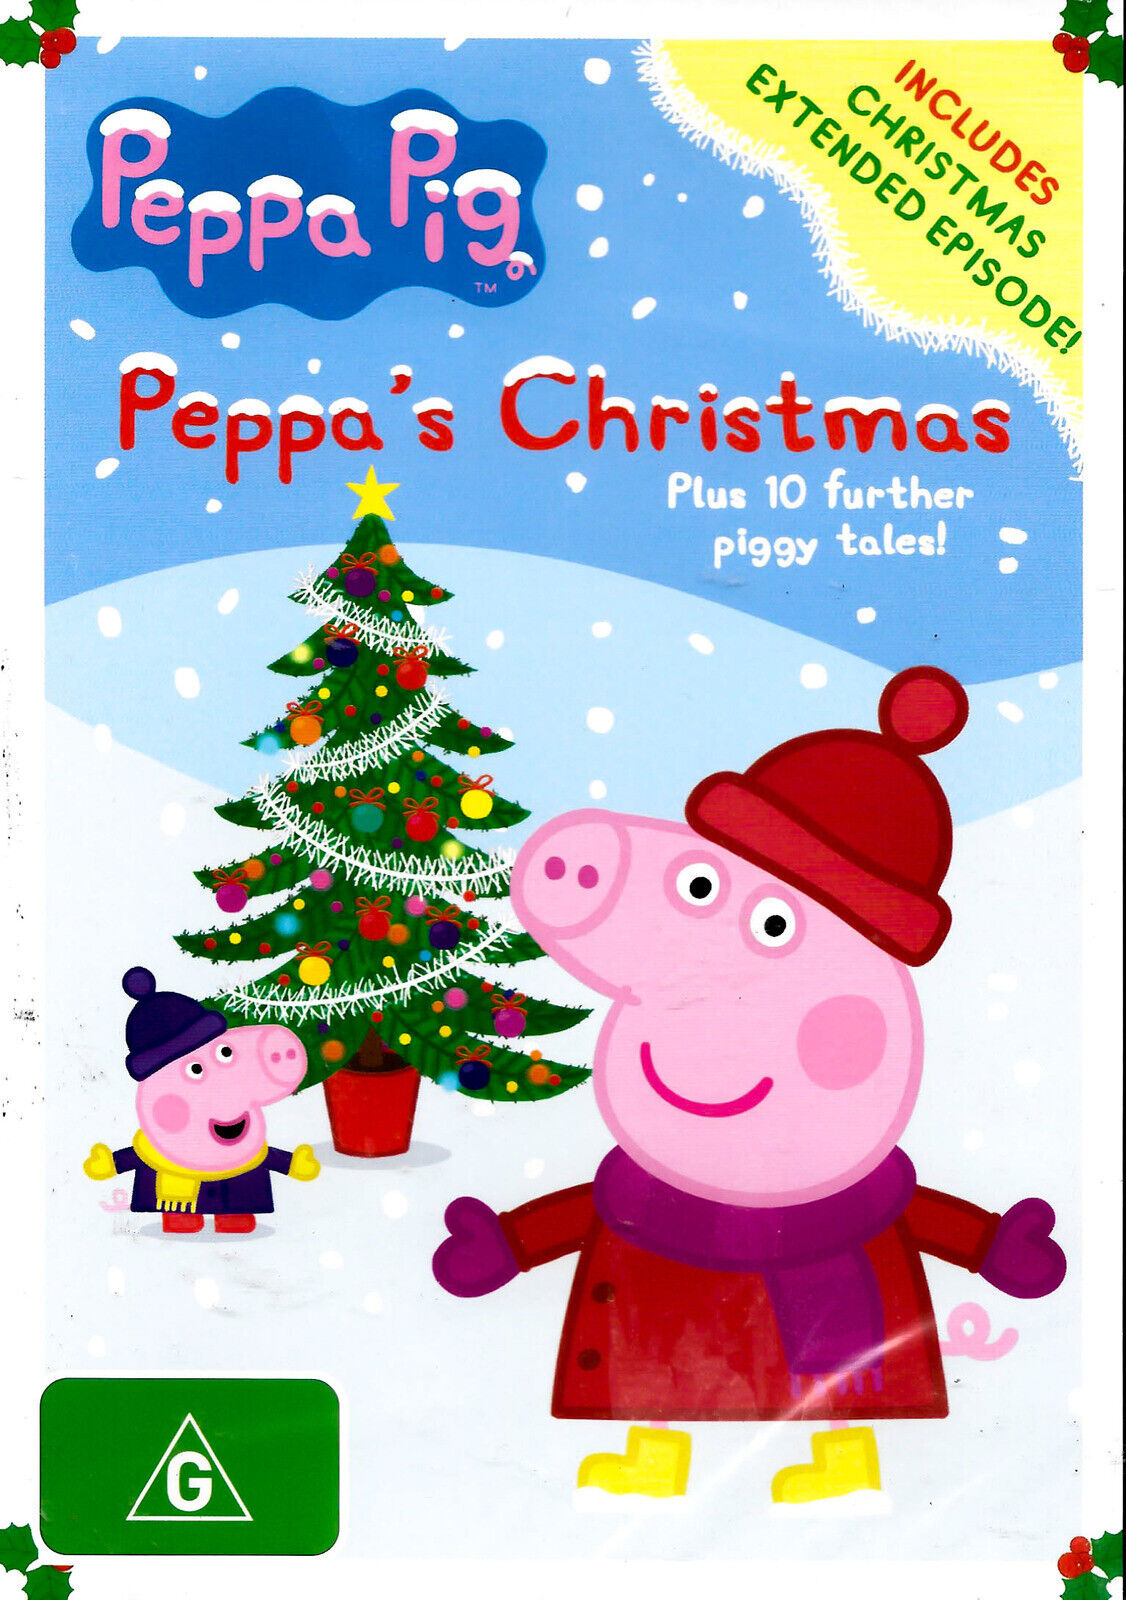 Peppa Pig Peppa's Christmas Plus 10 further piggy tales! (Includes  Christmas Ext